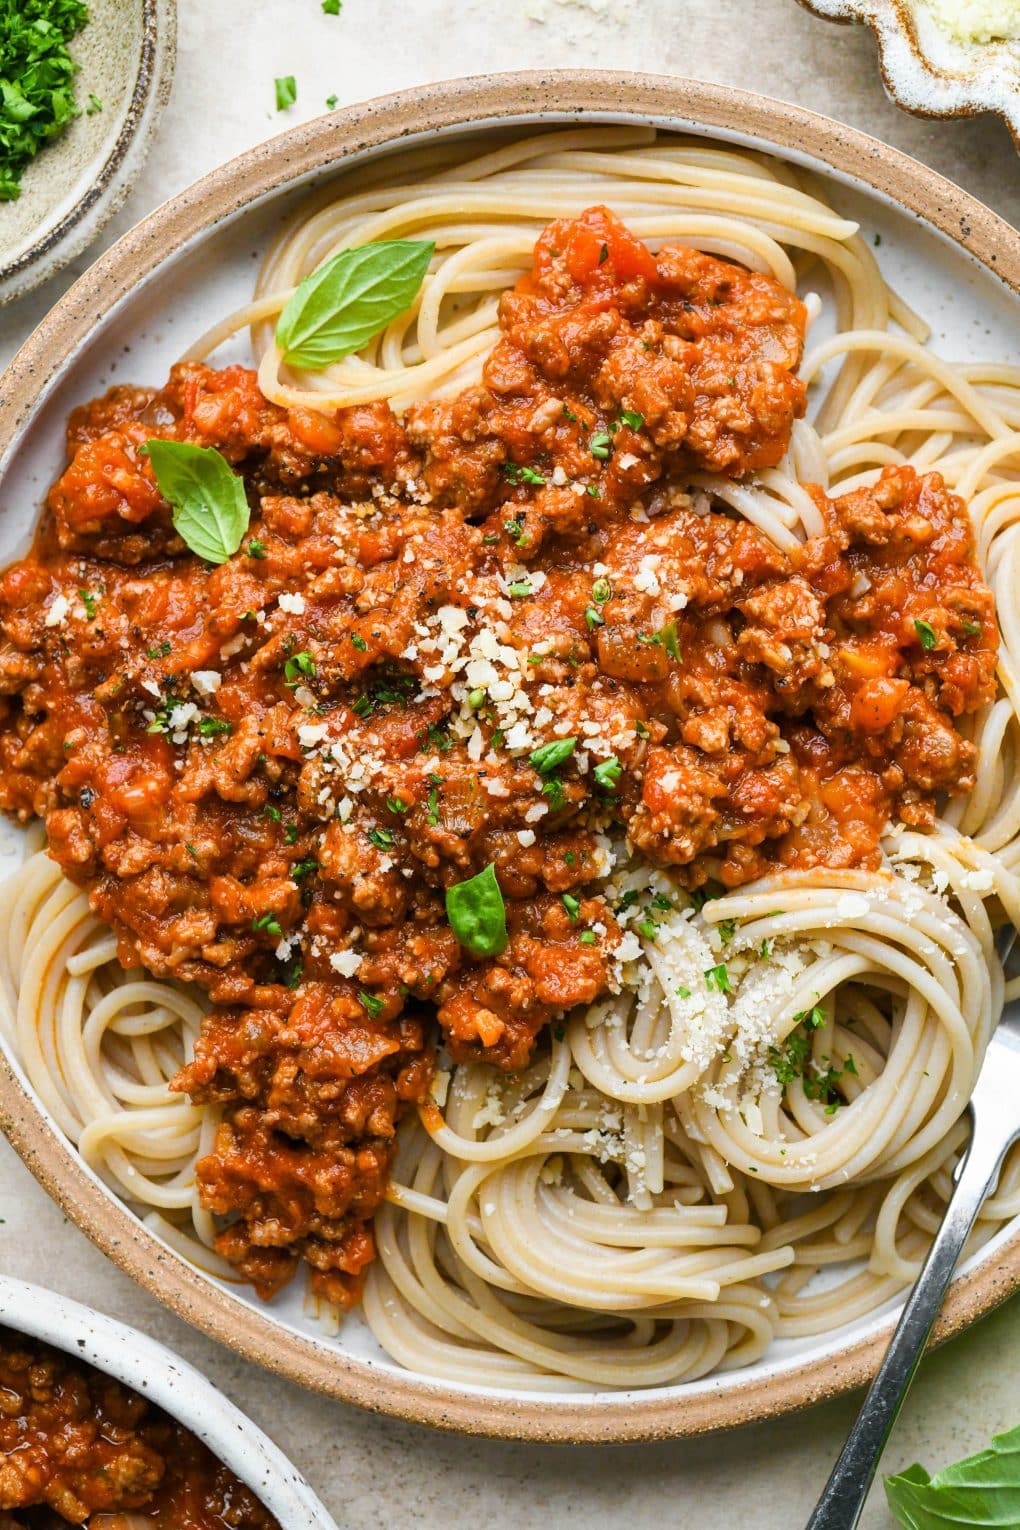 A rustic ceramic plate of twirled spaghetti topped with homemade marinara sauce with ground beef.